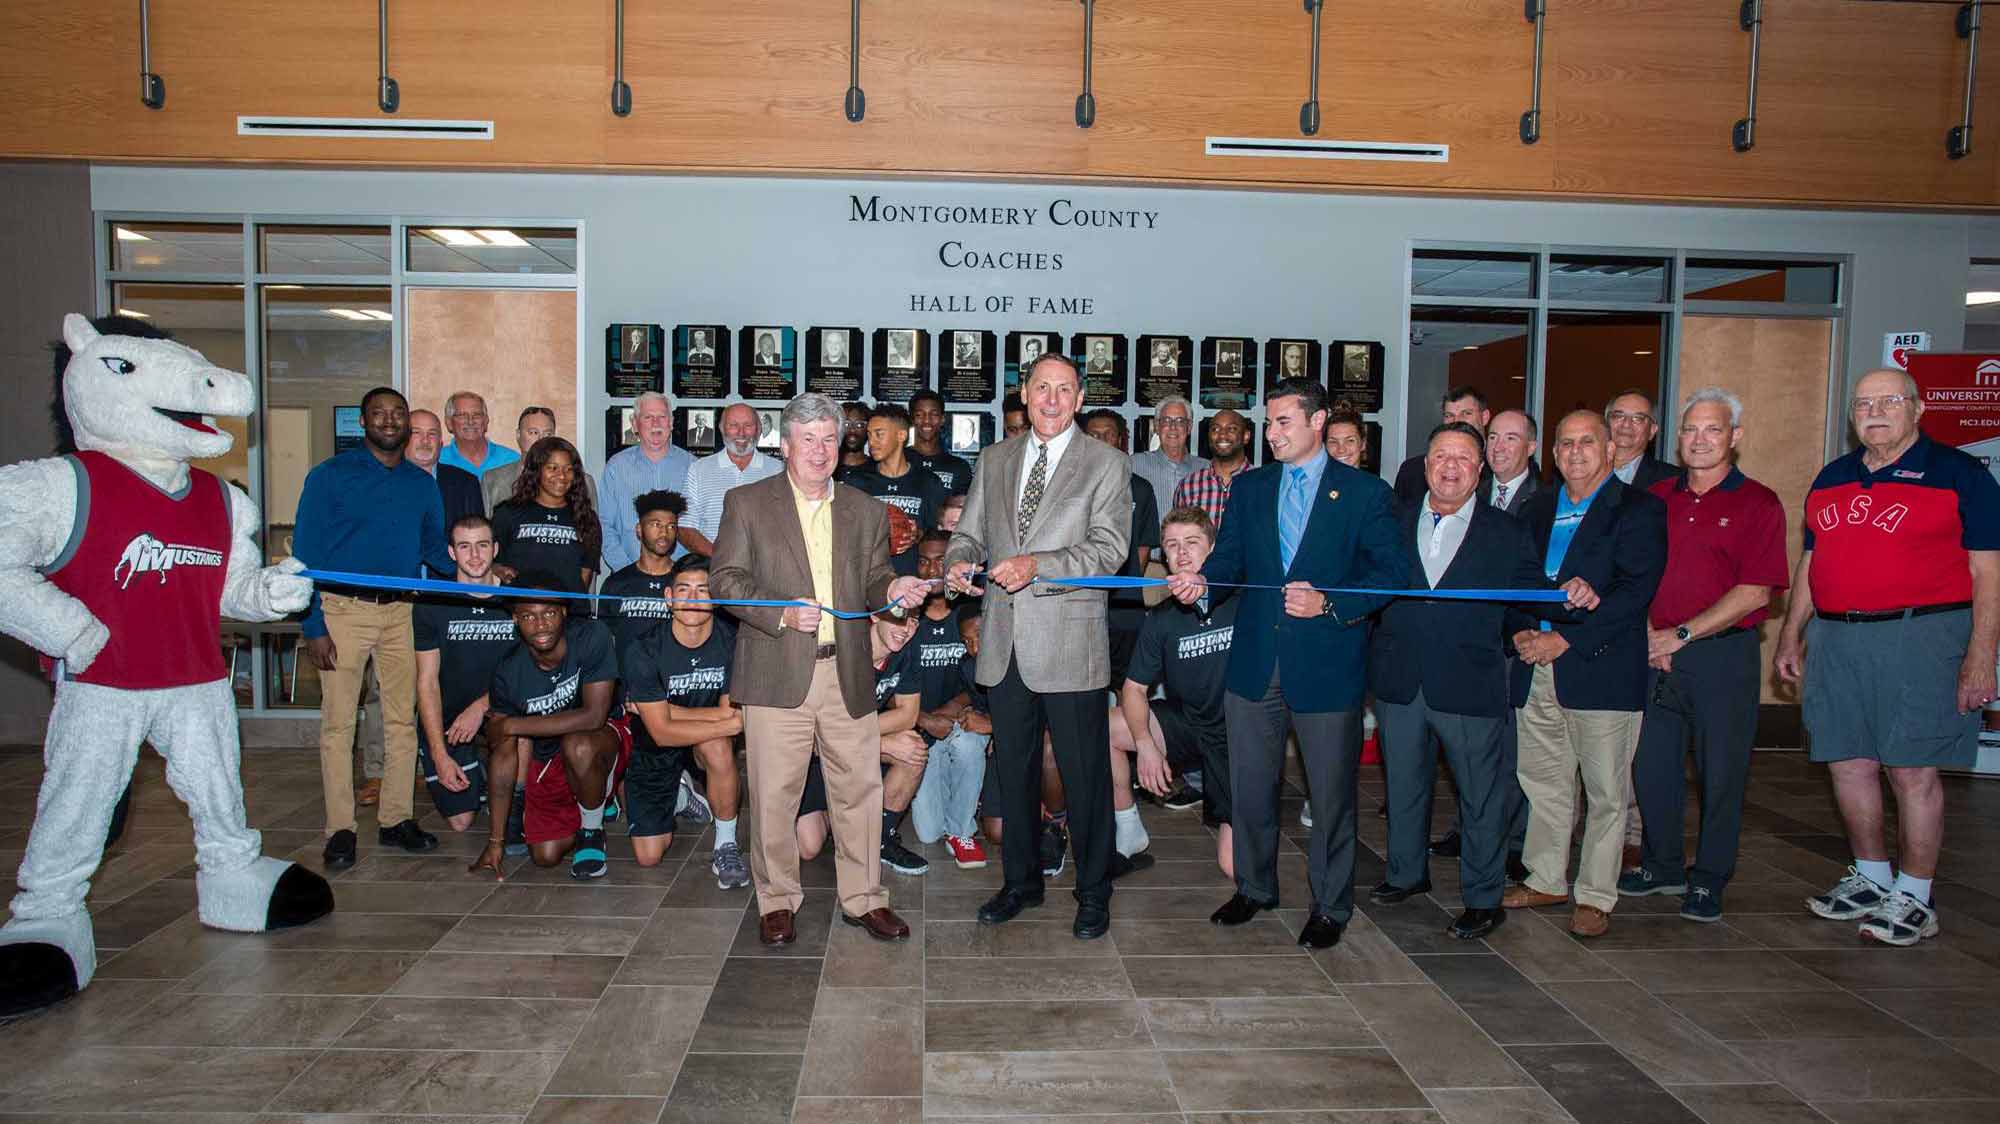 Members of the Coaches Hall of Fame Advisory Board together with Montgomery County Commissioner Joseph Gale, MCCC President Dr. Kevin Pollock, the Mustangs men’s basketball team and visitors celebrated the unveiling of the Hall of Fame located in Montco's Health Sciences Building in Blue Bell.